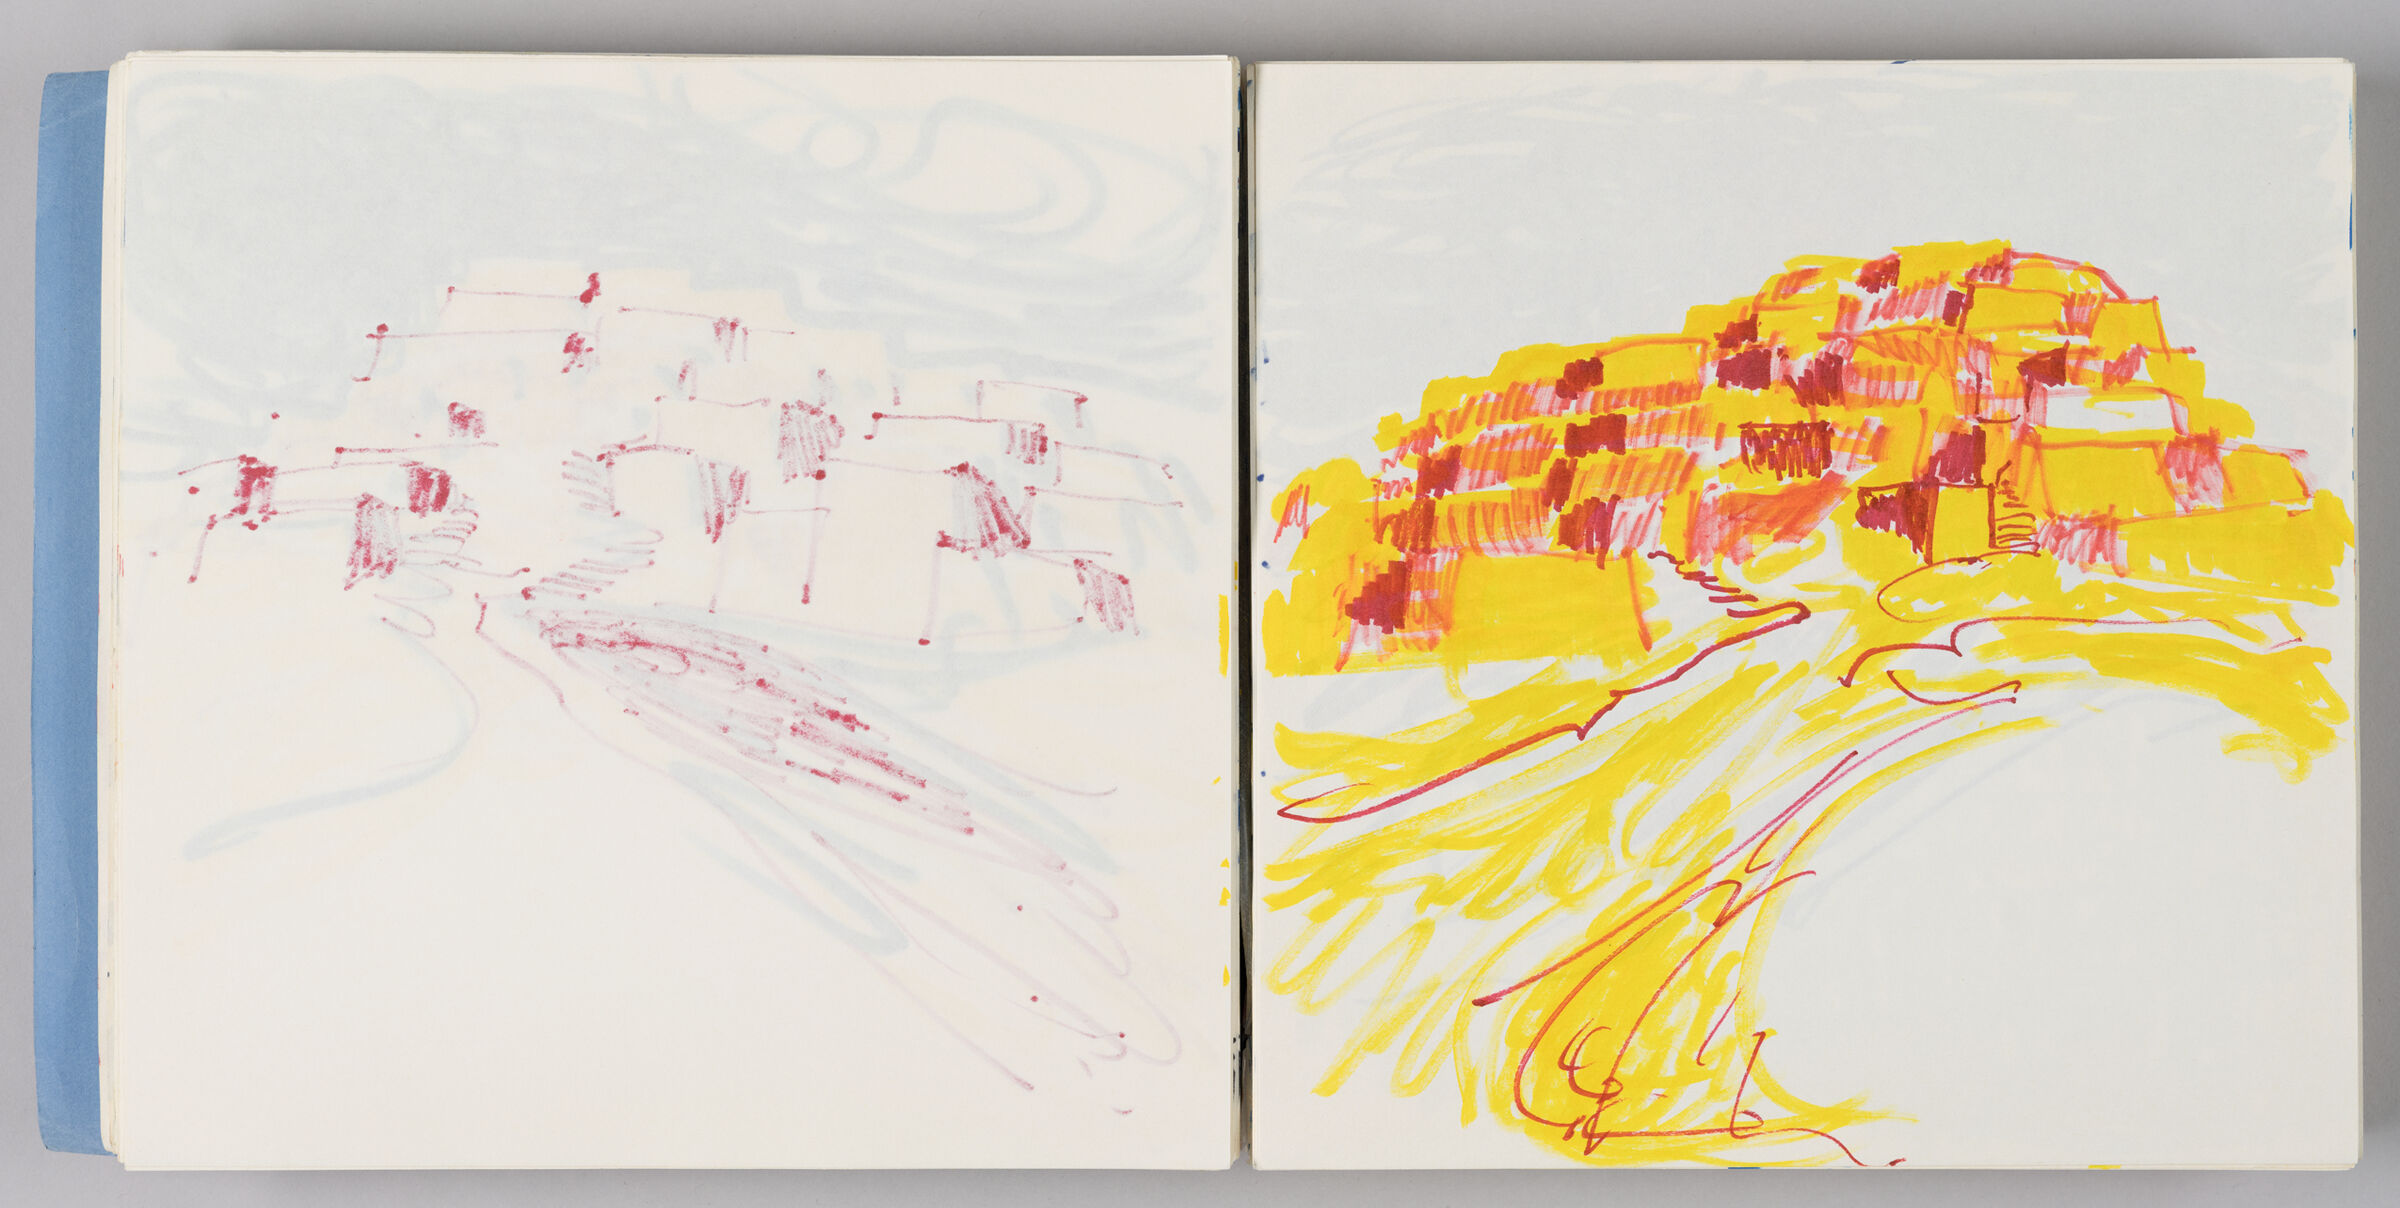 Untitled (Bleed-Through Of Previous Page, Left Page); Untitled (View Of Freija, Right Page)